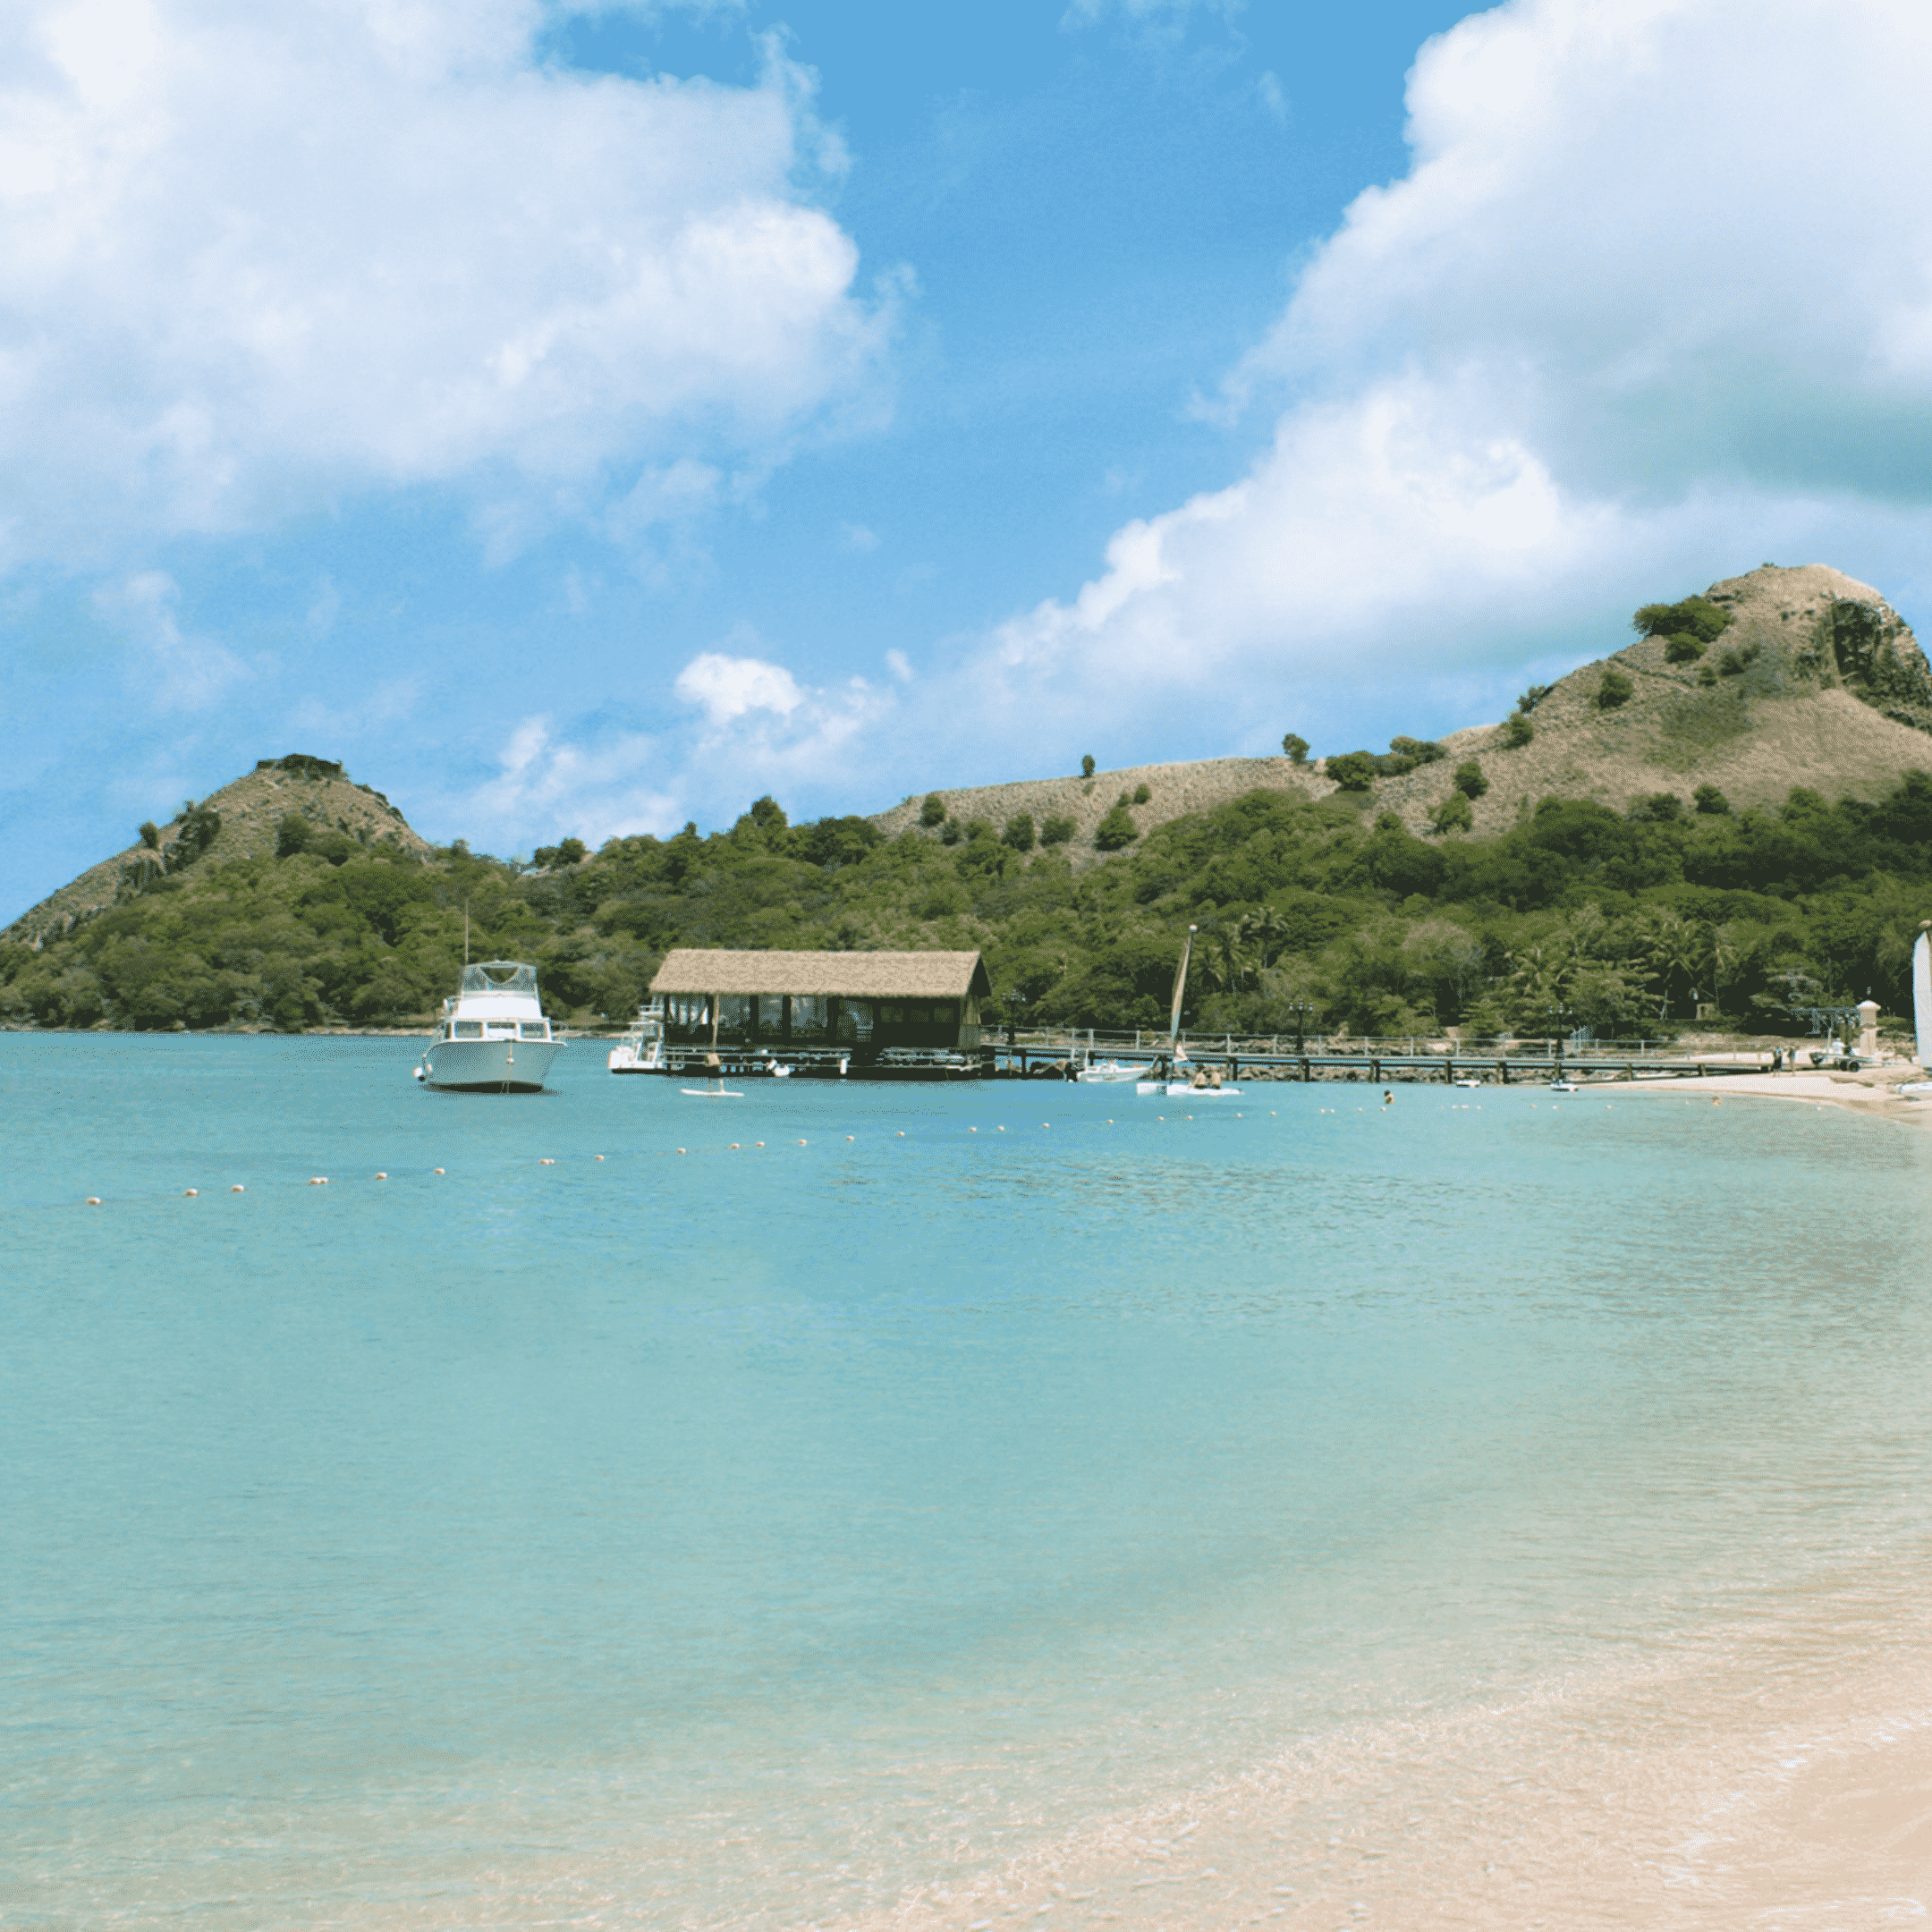 25 places to visit before turning 25 | St Lucia